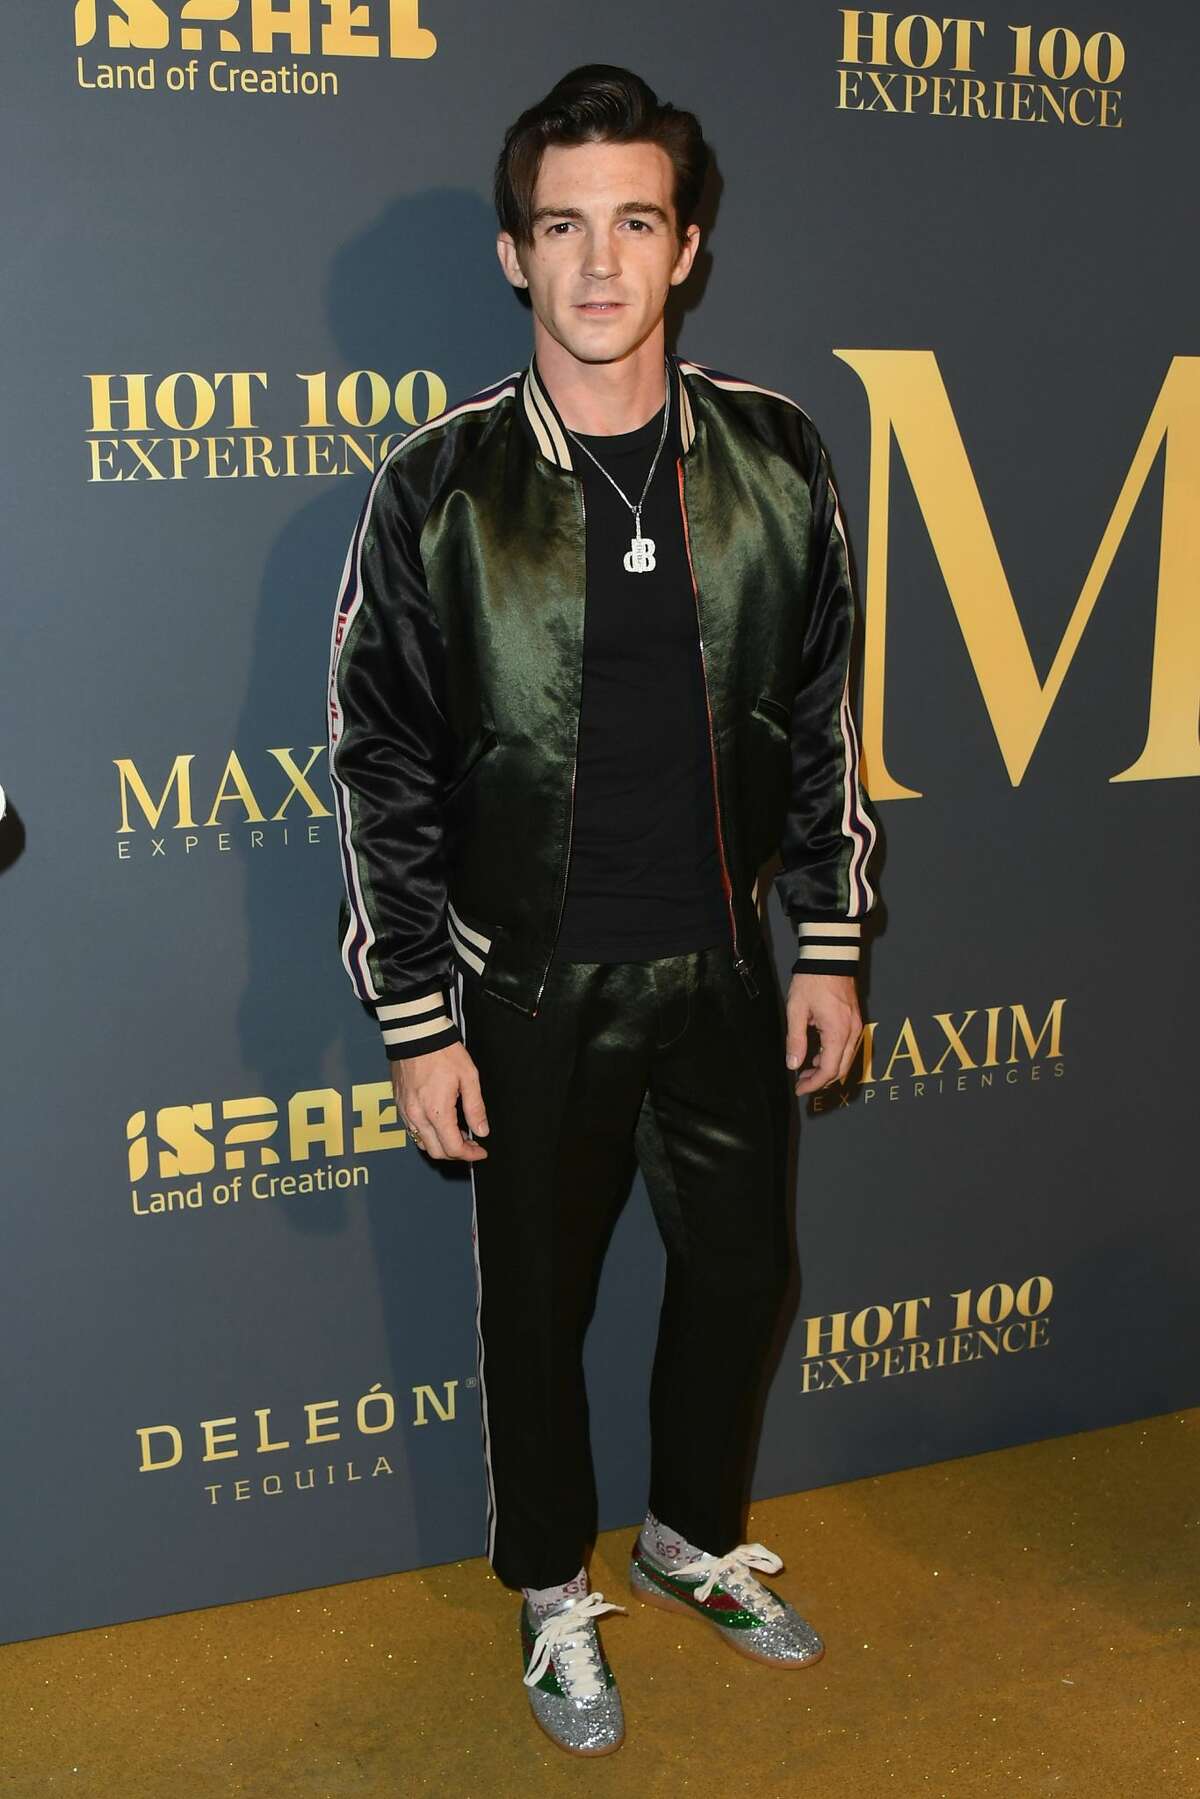 Drake Bell at The Maxim Hot 100 Experience at Hollywood Palladium on July 21, 2018 in Los Angeles, California.